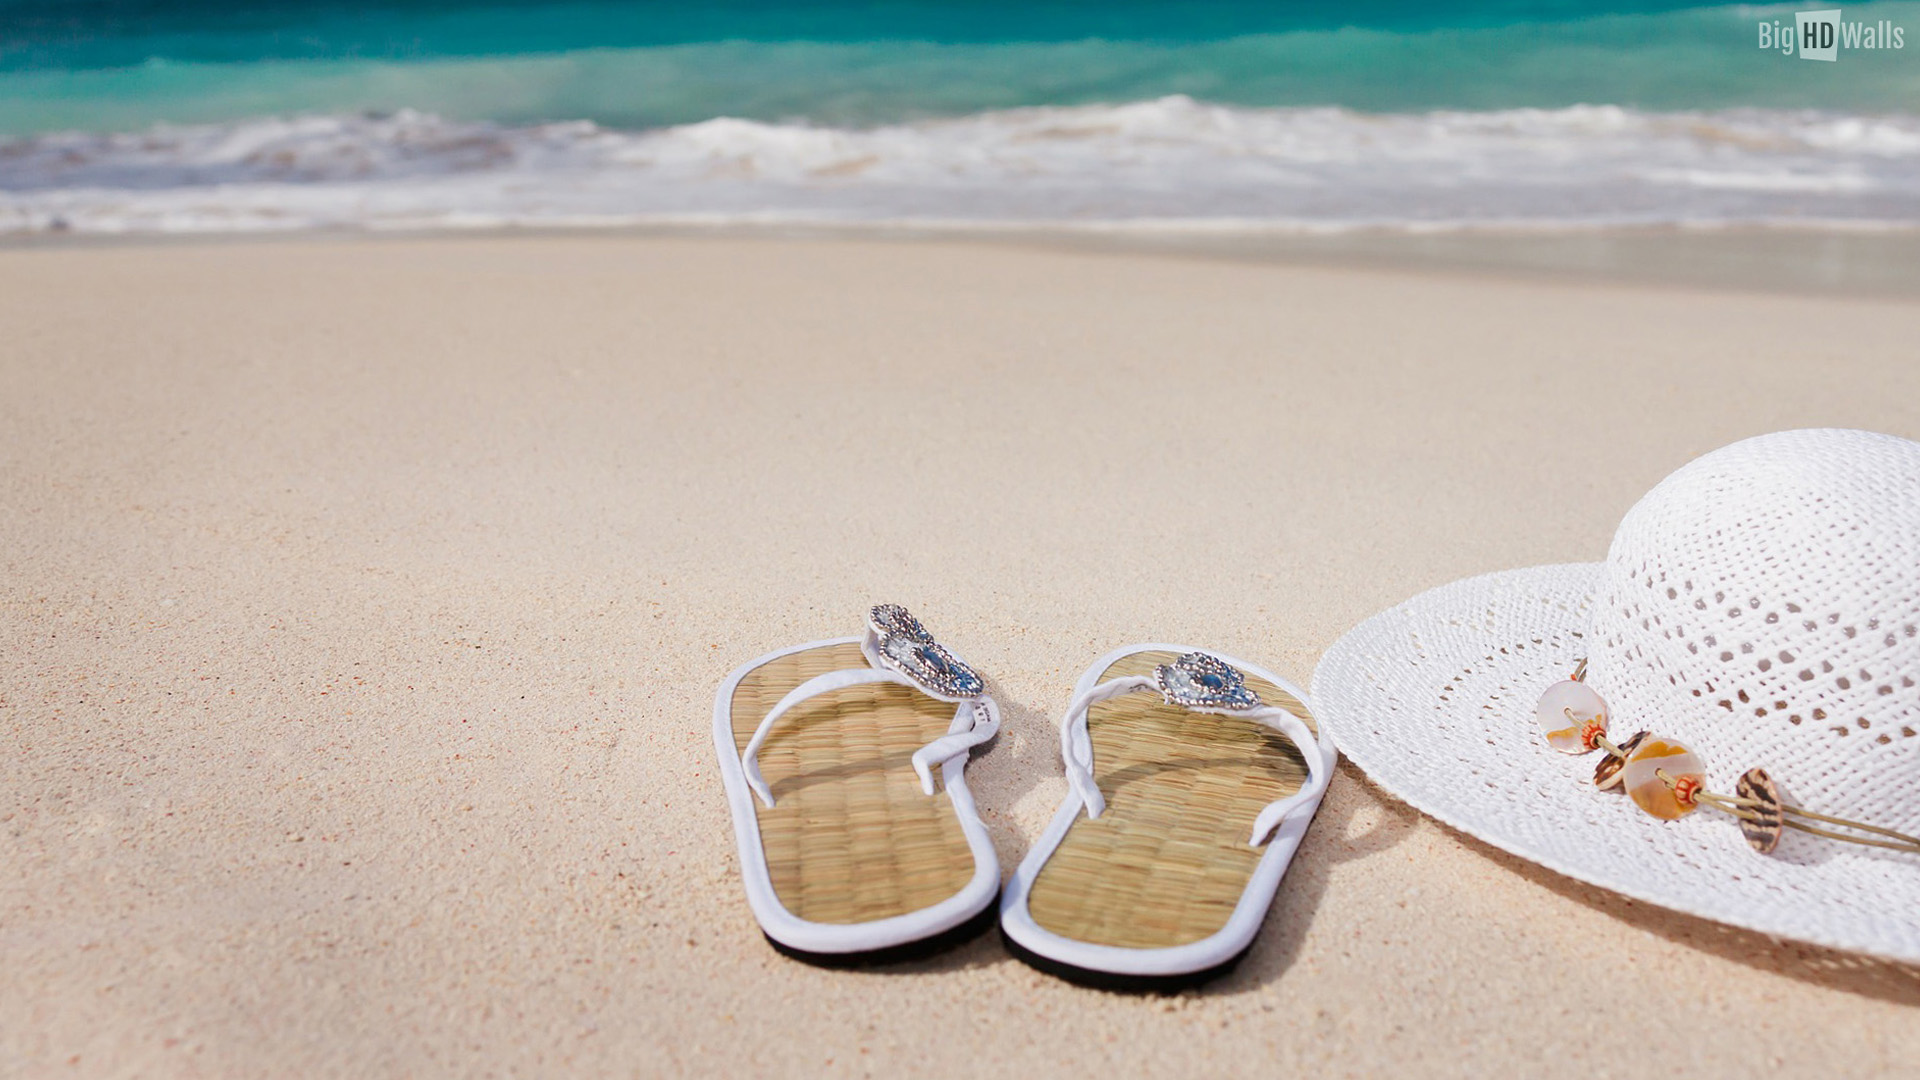 Summer beach sandals and straw hat Wallpapers Beach Pictures and